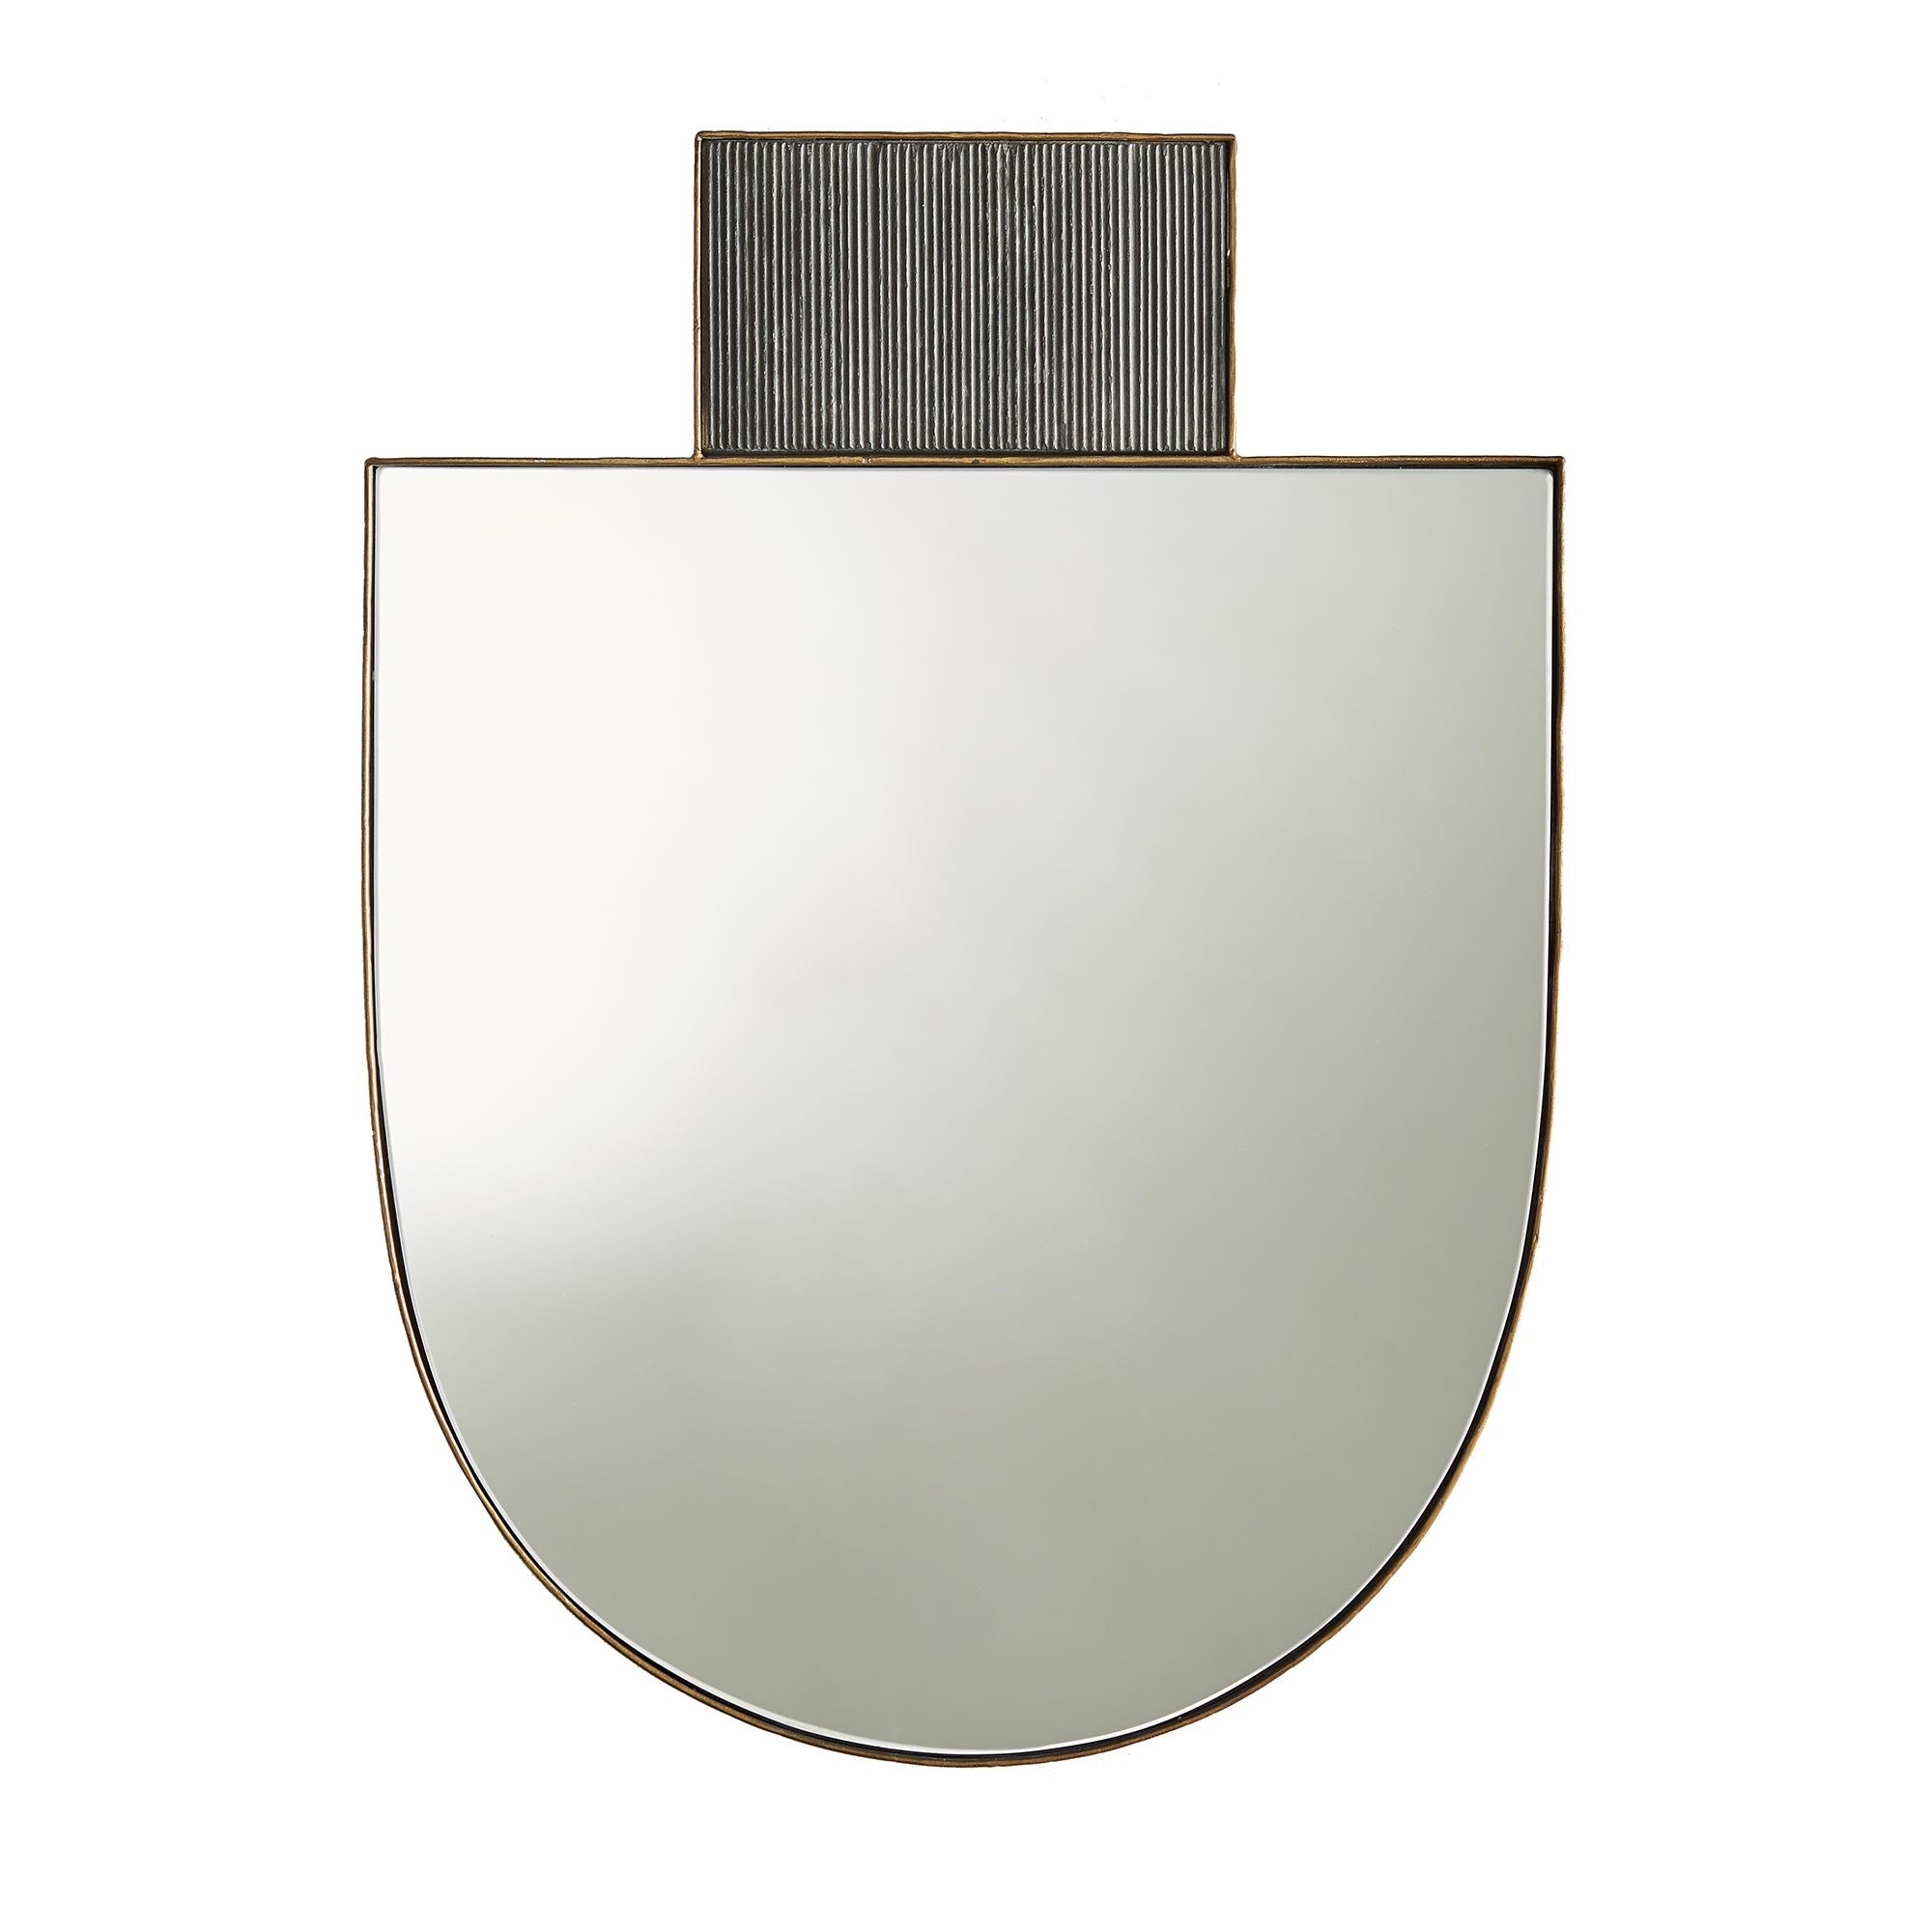 front view of geometric mirror